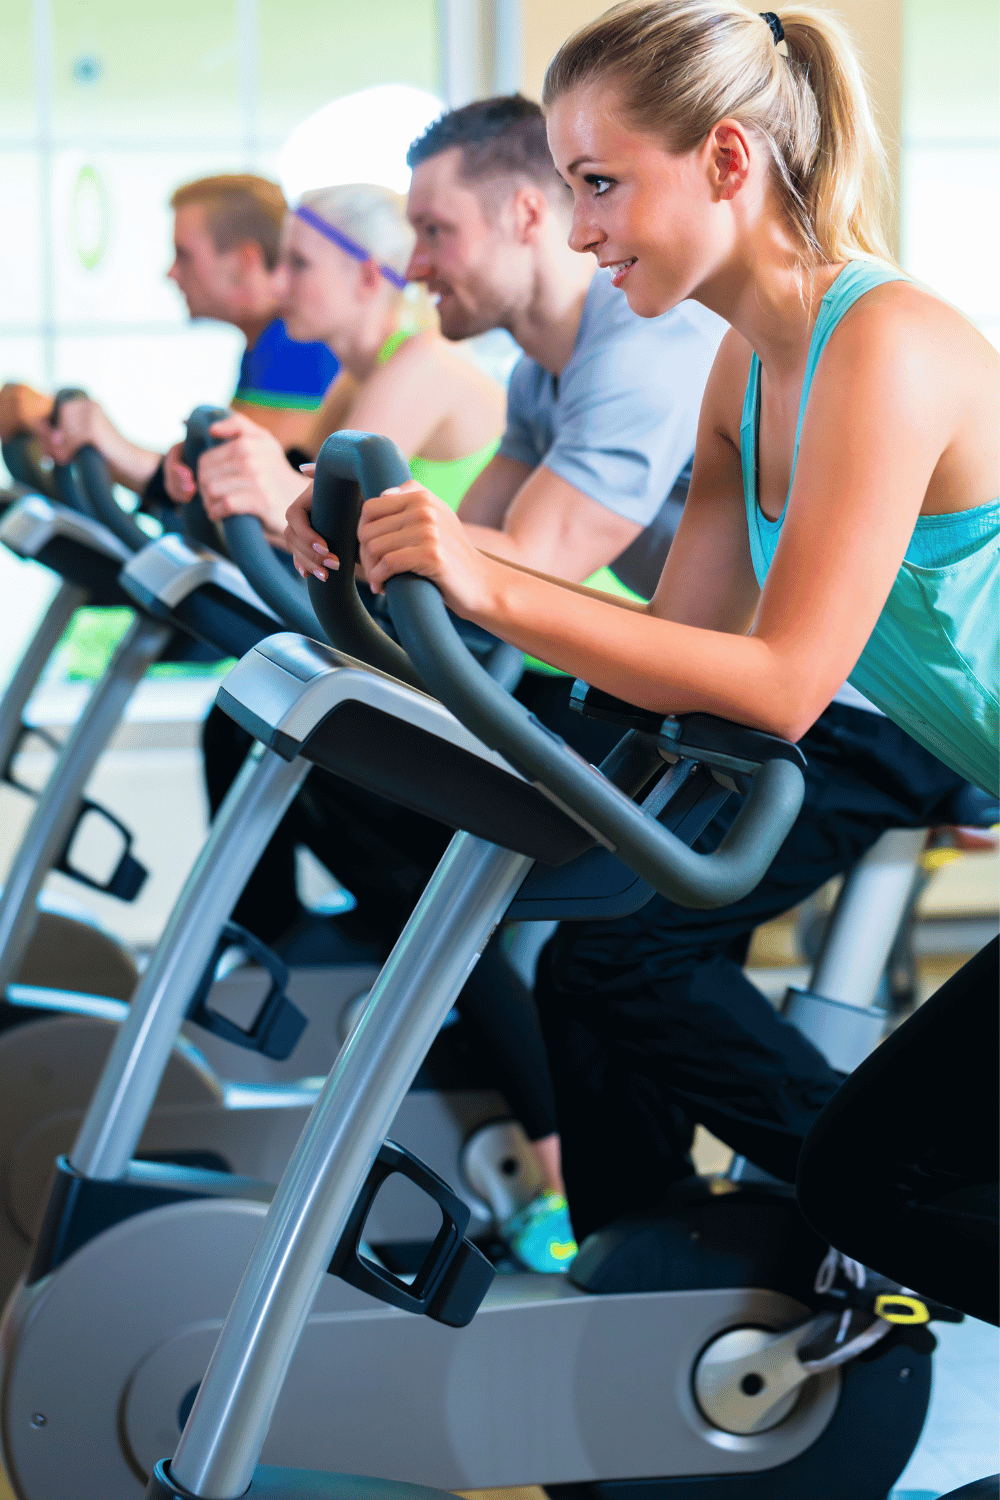 Prioritizing Health: Why Joining a Gym is a Wise Decision in the Modern Era